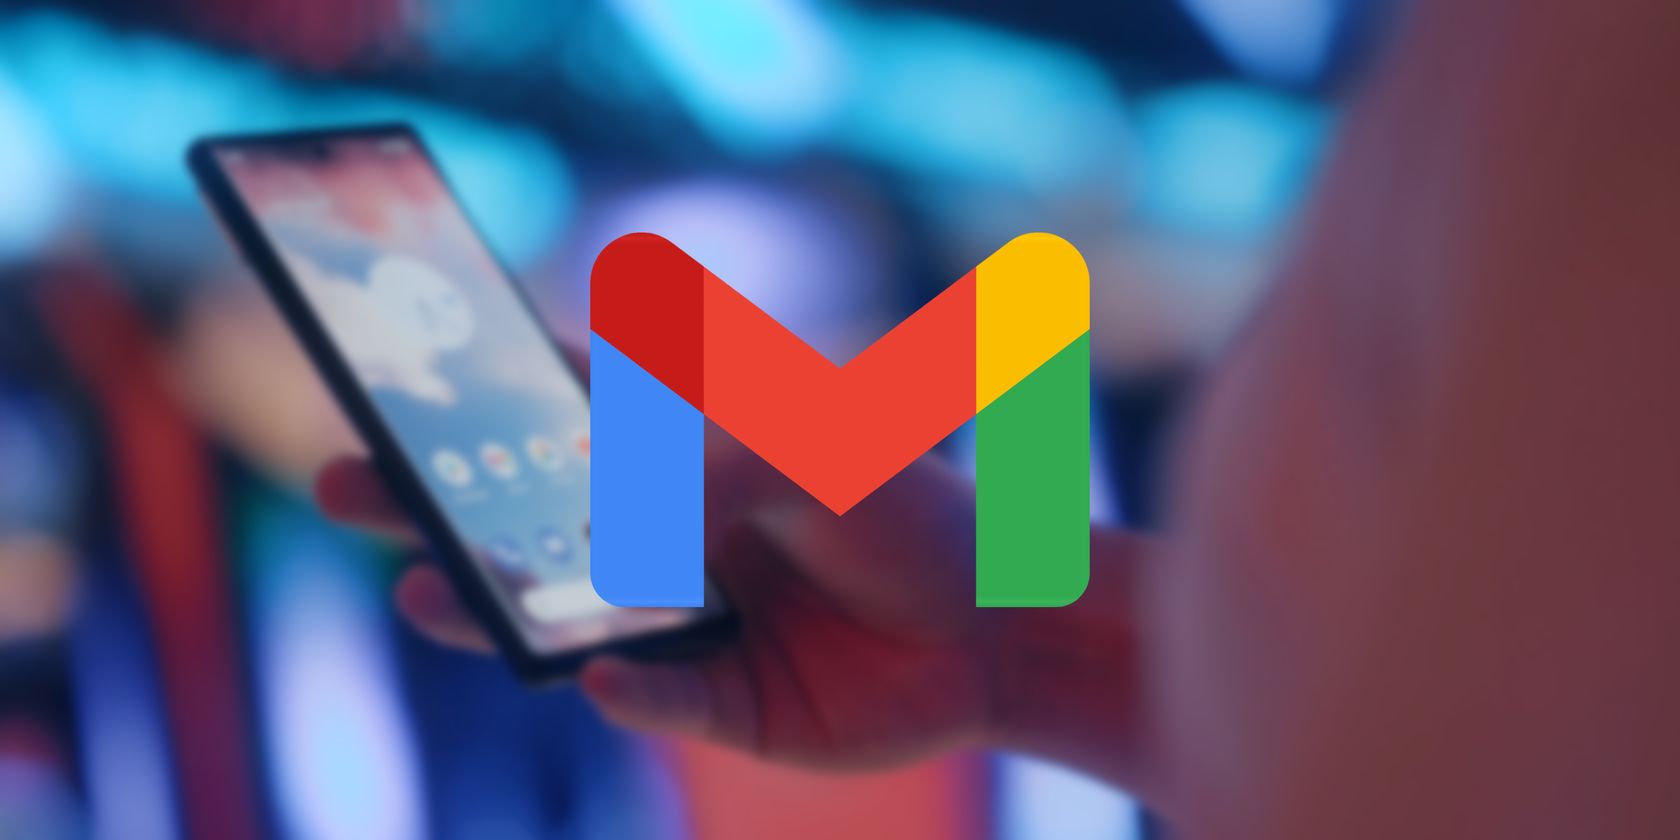 An image of a person using a smartphone with the Gmail logo overlay in the middle